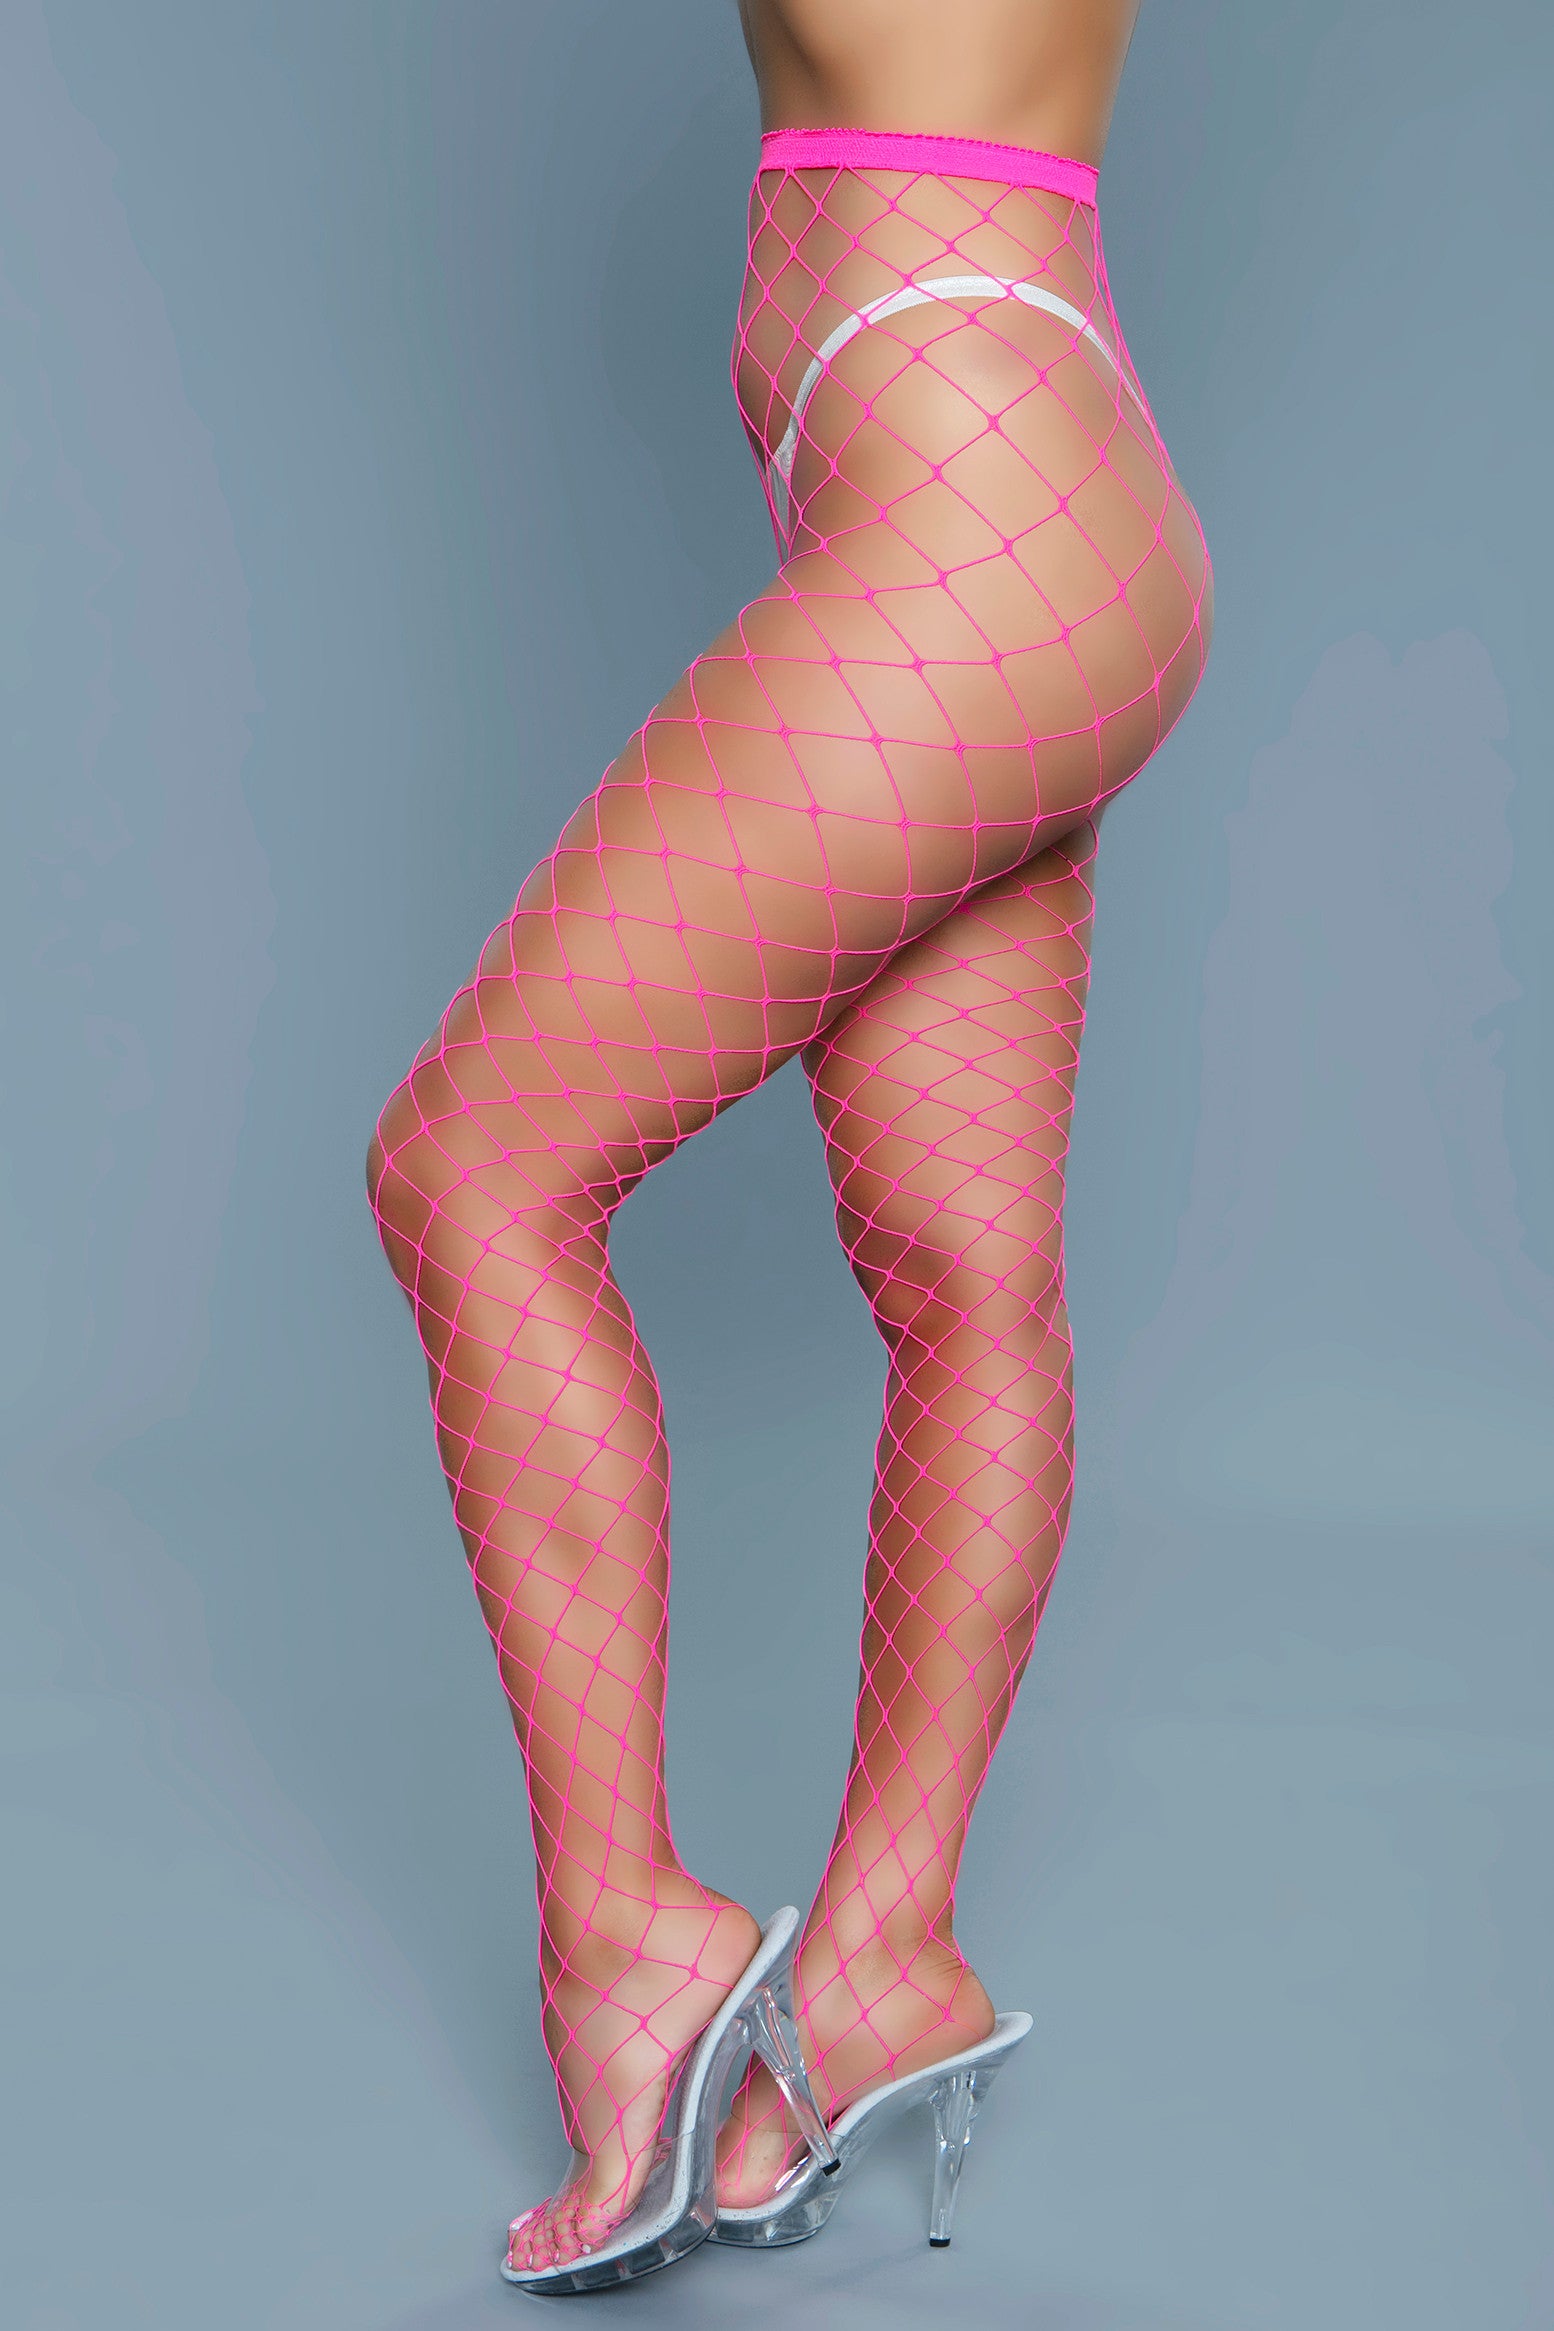 Oversized Fishnet Pantyhose - O/S -  All Colors